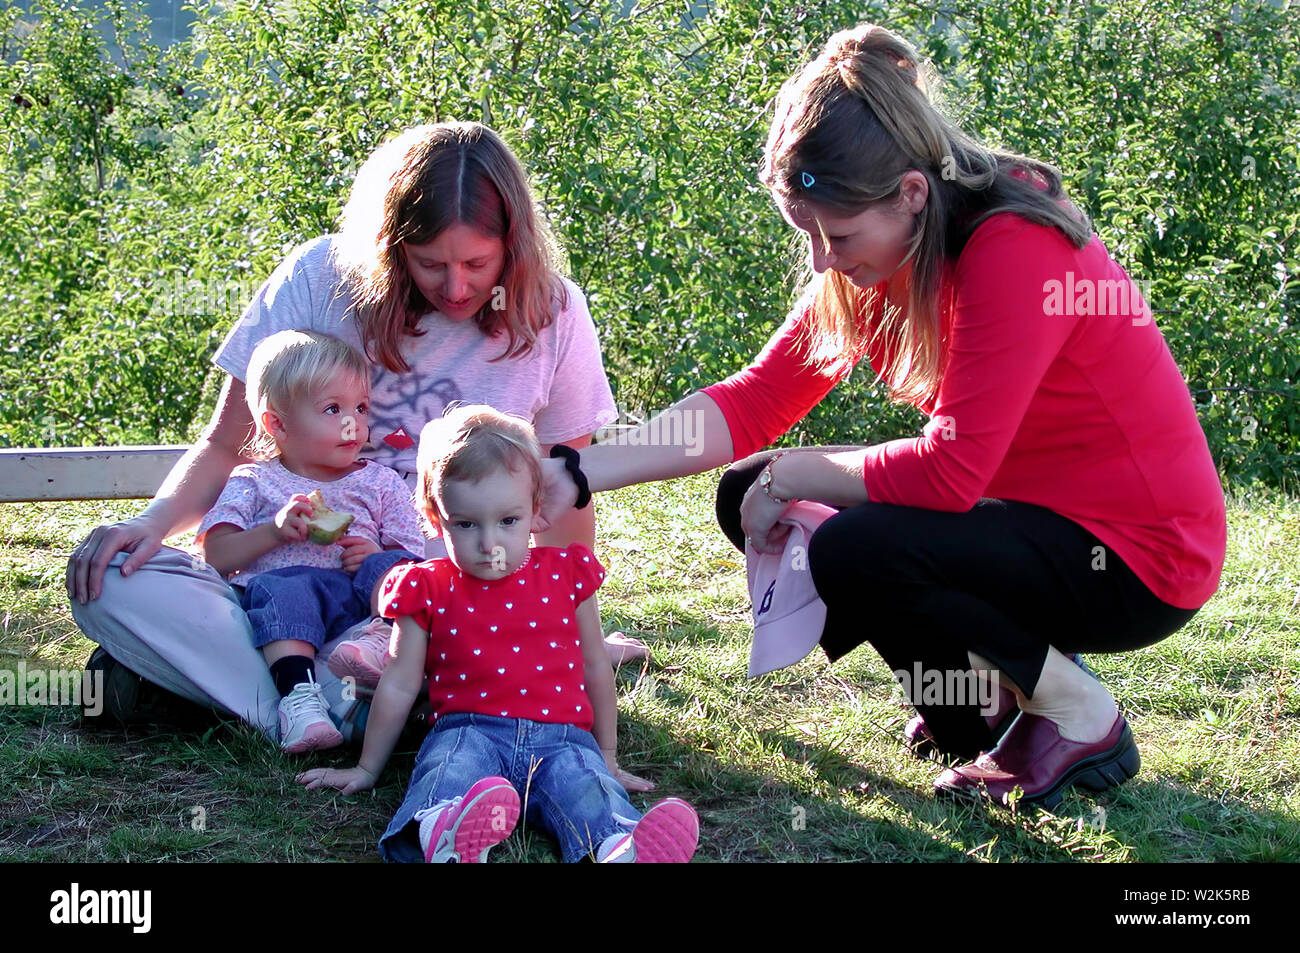 Middlefield, CT USA. Sep 2016. Young toddler holding her unfinished apple looking with curiosity about the woman stranger touching her sister`s hair. Stock Photo